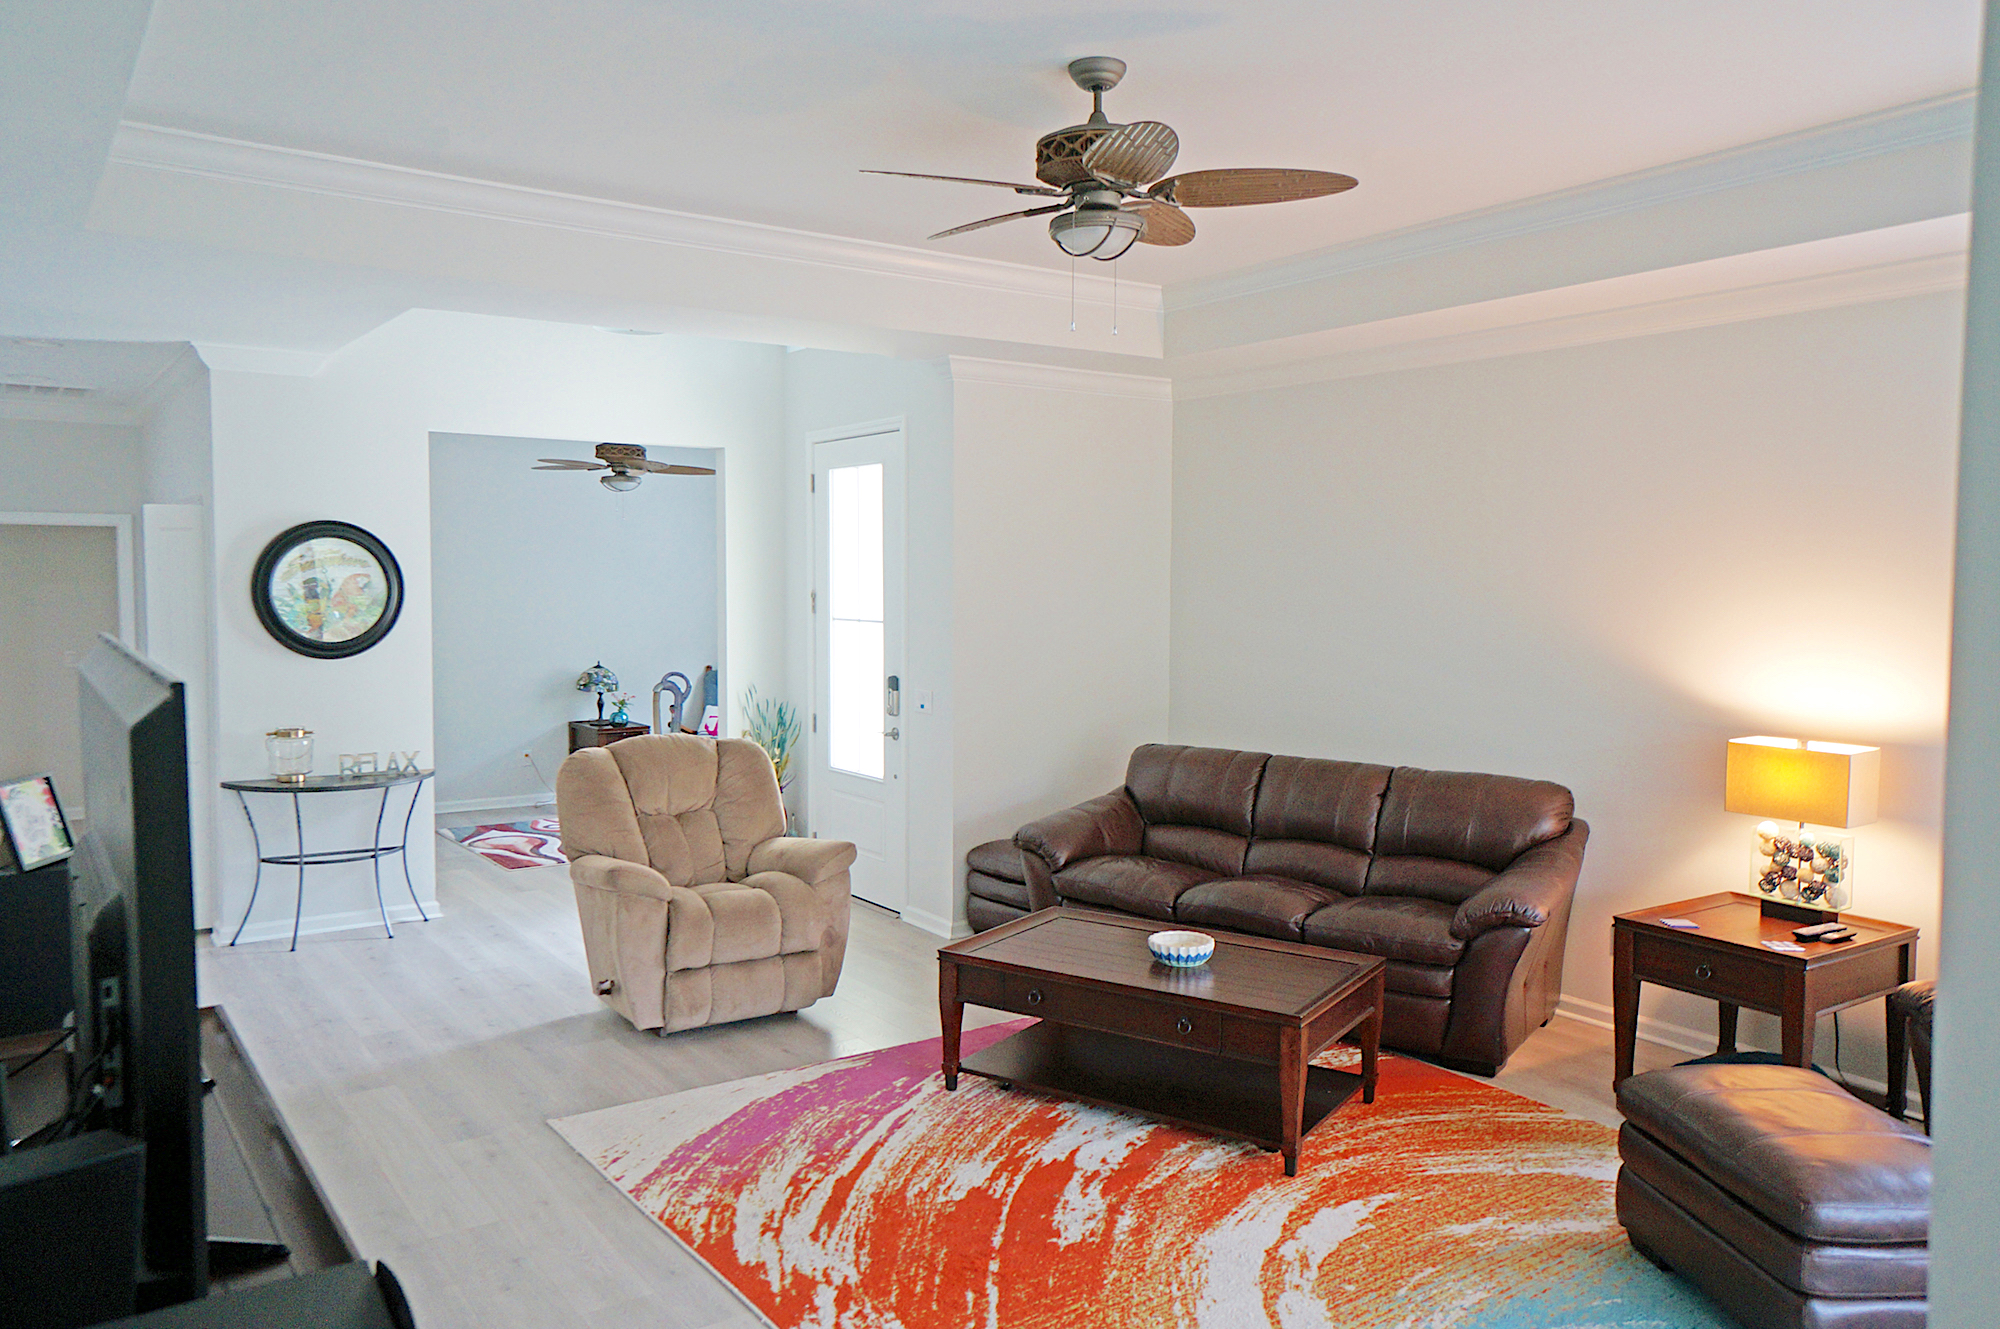 Conch Shell Ct, Hardeeville, SC 29927 #1